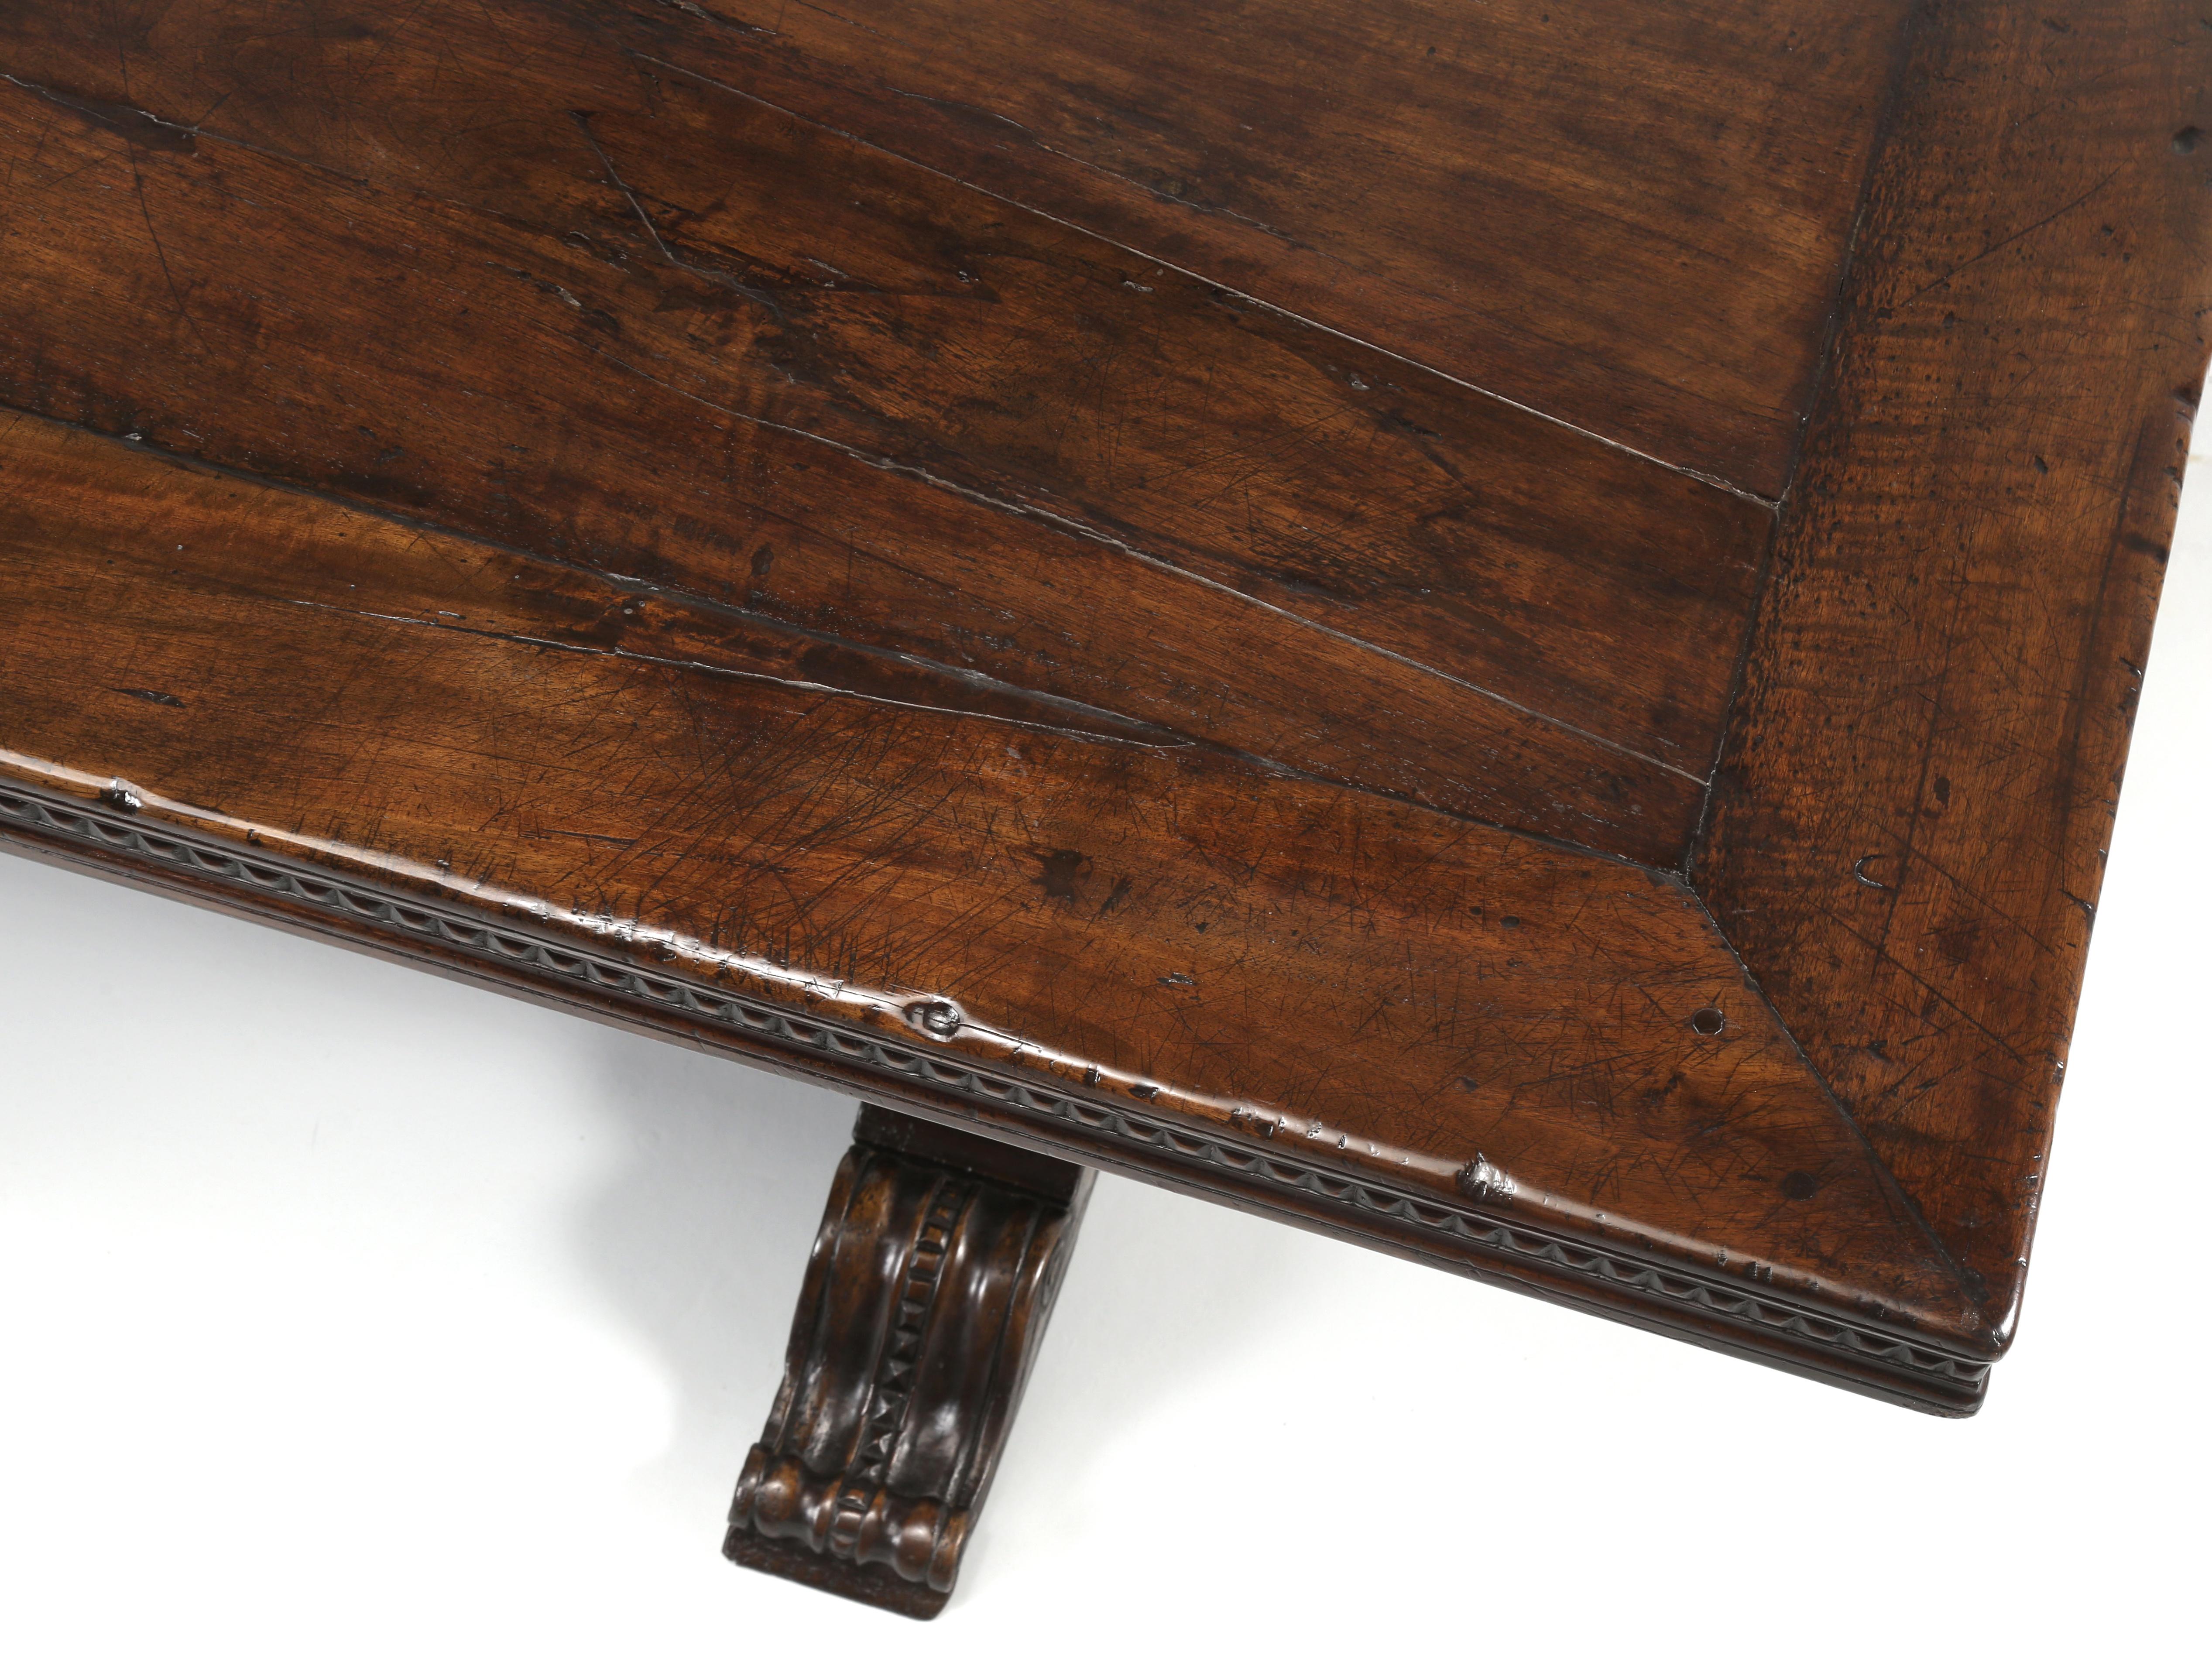 Hand-Carved Magnificent Country French Walnut Dining Table or Sofa Table from Bordeaux 